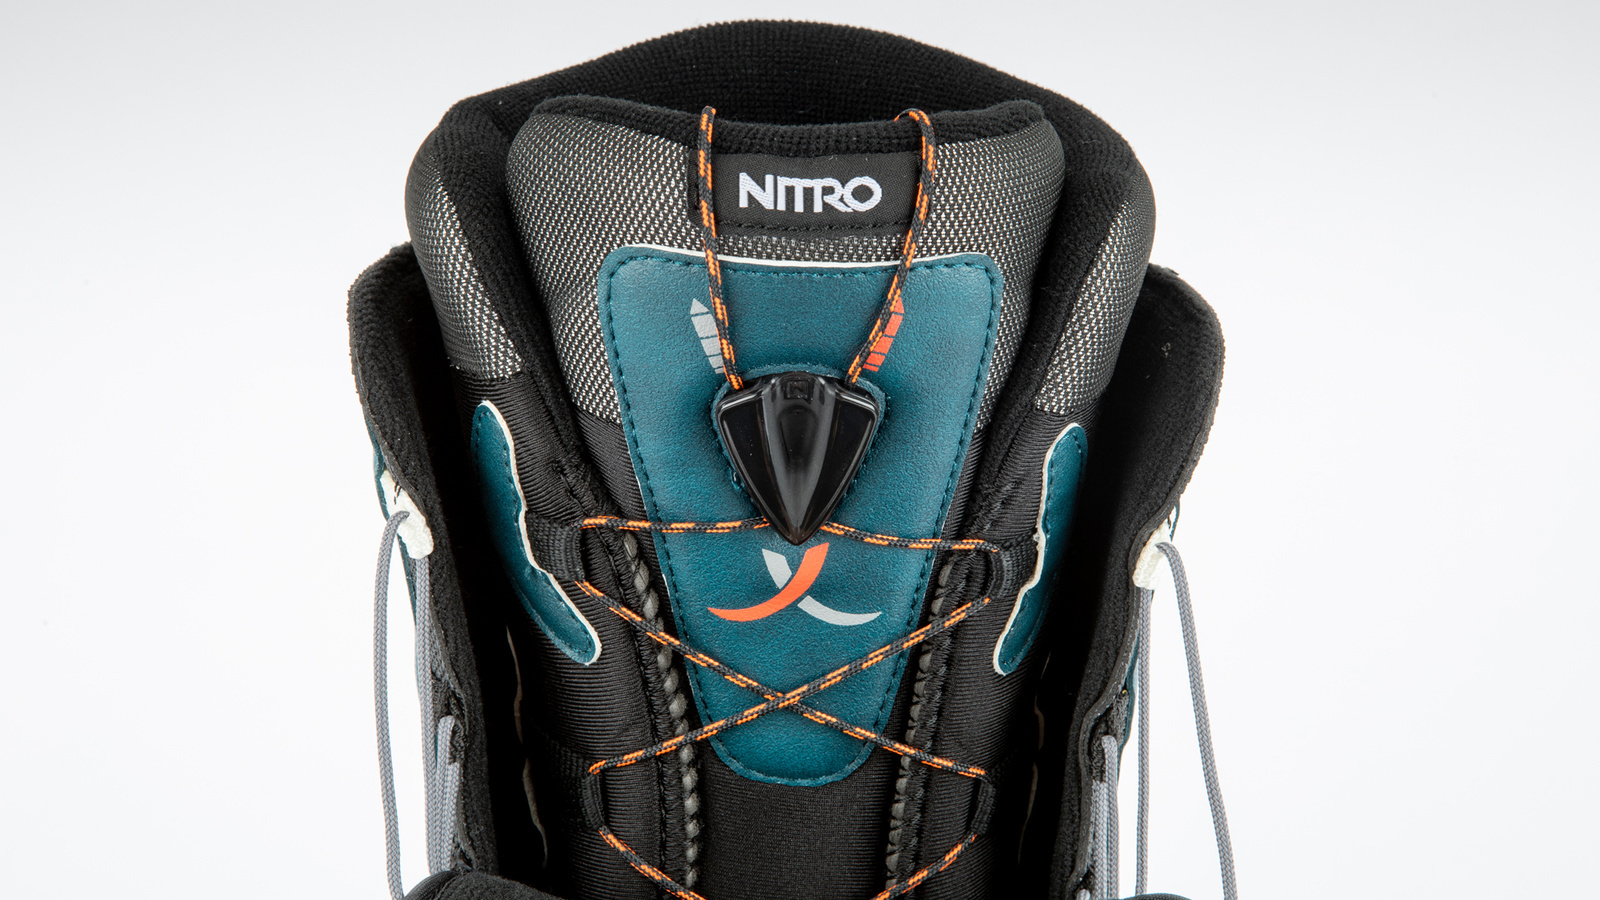 Buy Nitro Incline TLS Snowboard Boots Online At Sport